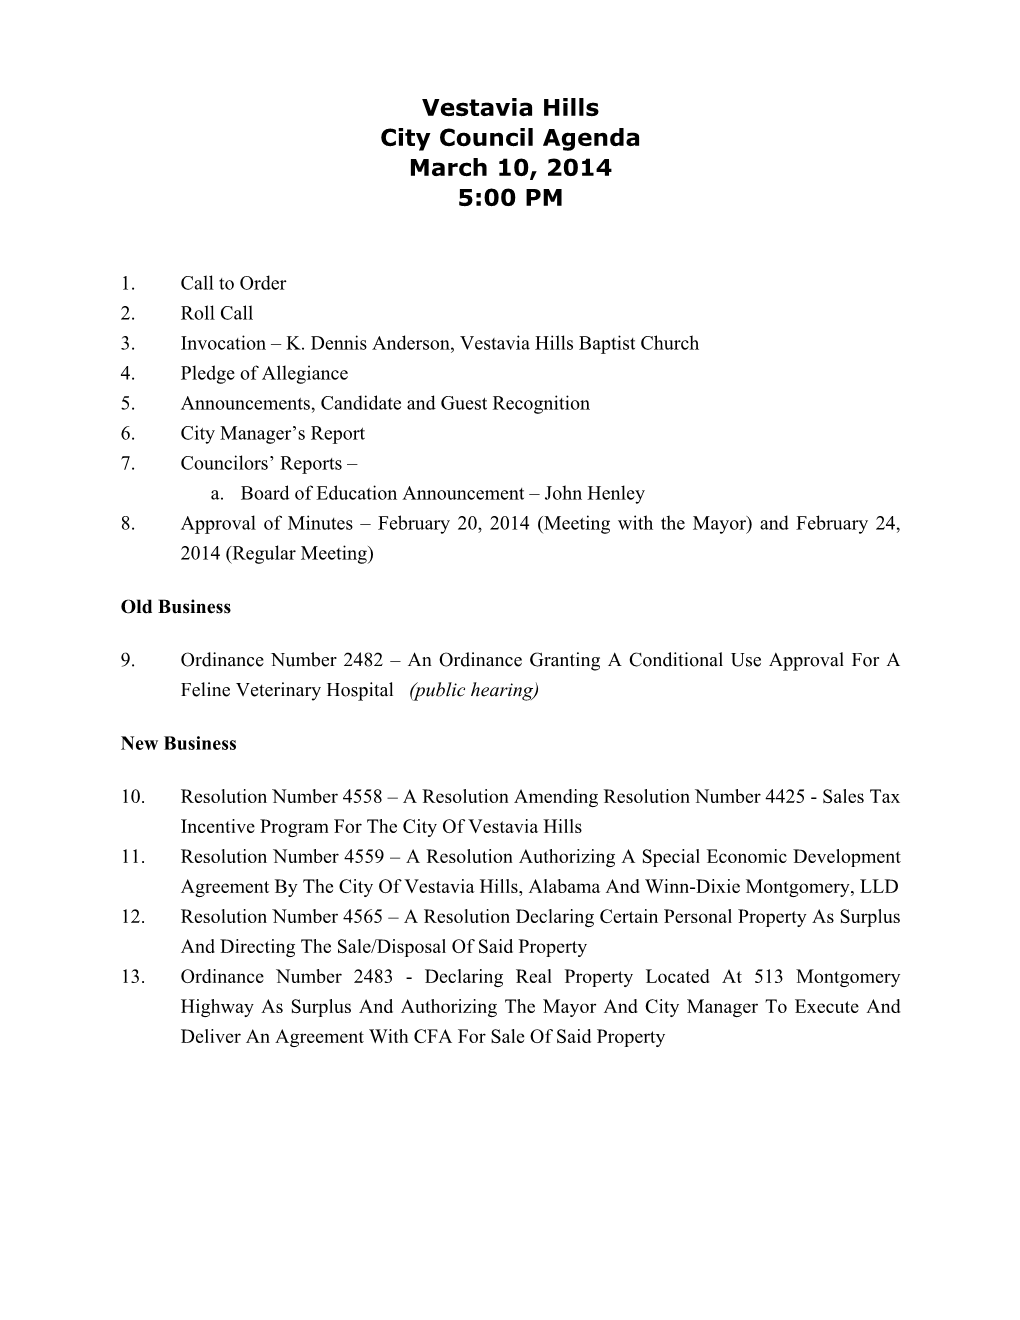 March 10, 2014 Agenda Packet